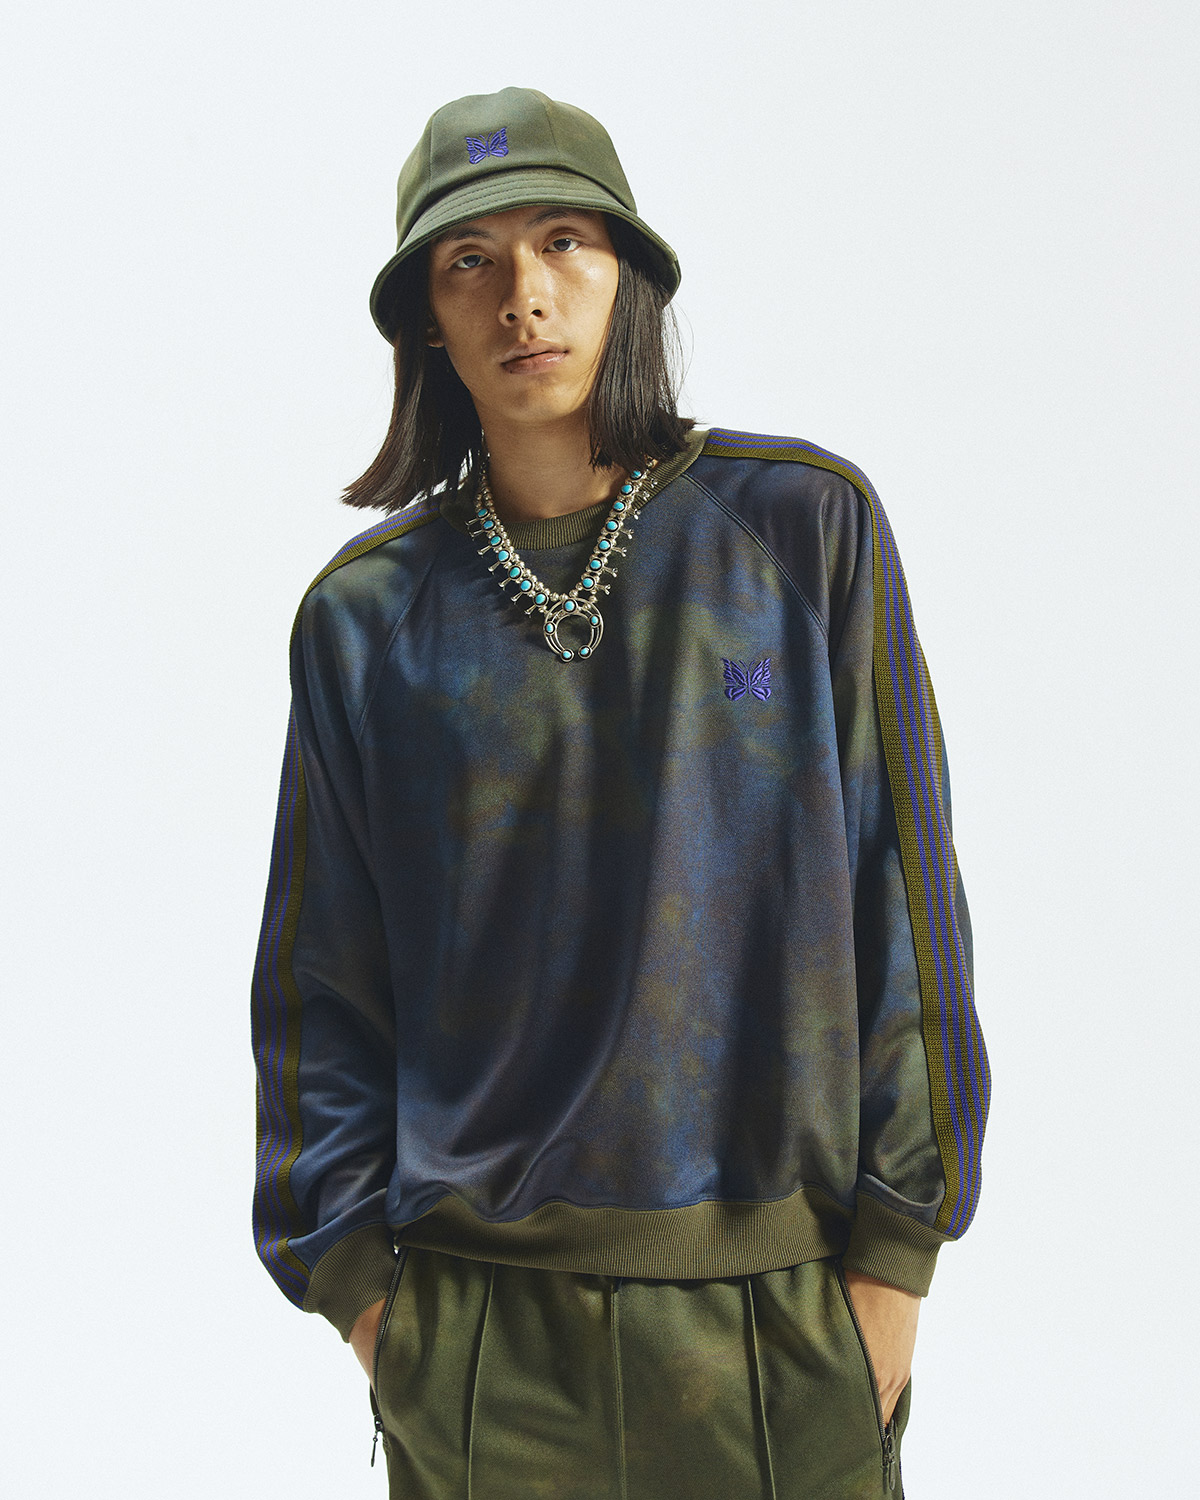 〈NEEDLES〉TRACK SUITS PRINTED UNEVEN DYE for NEPENTHES | MENS